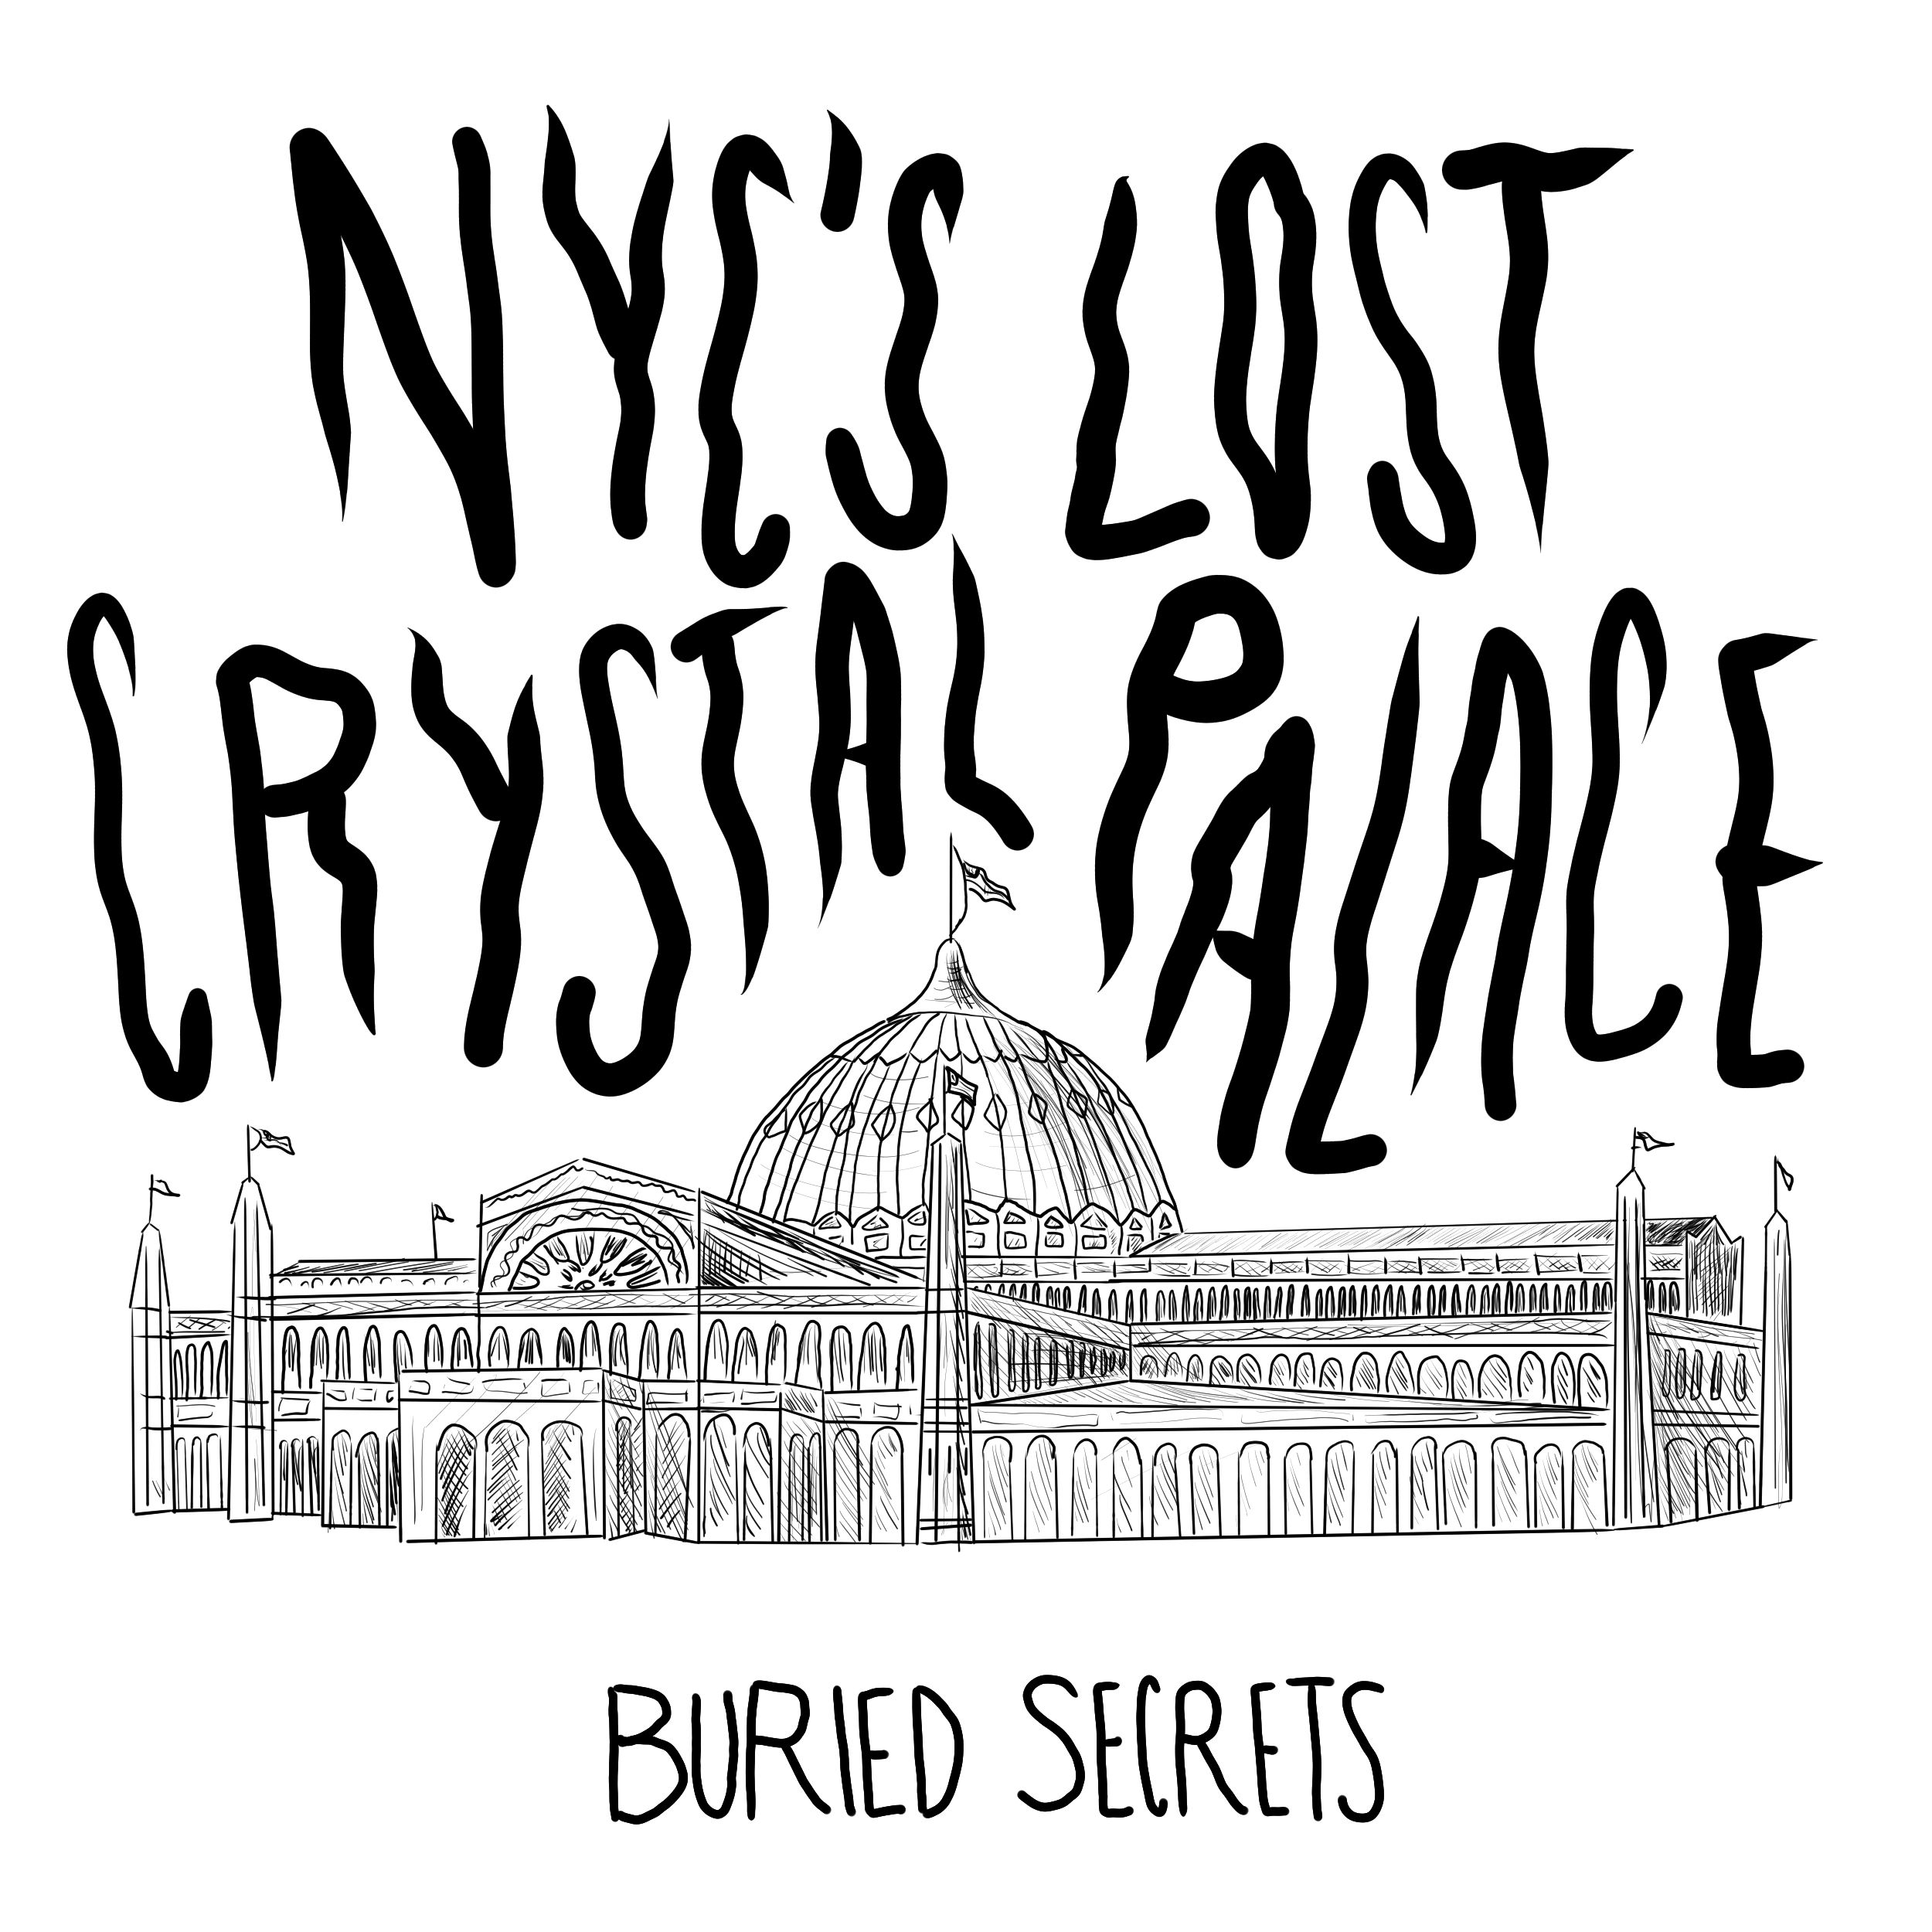 The New York Crystal Palace (Part 1)